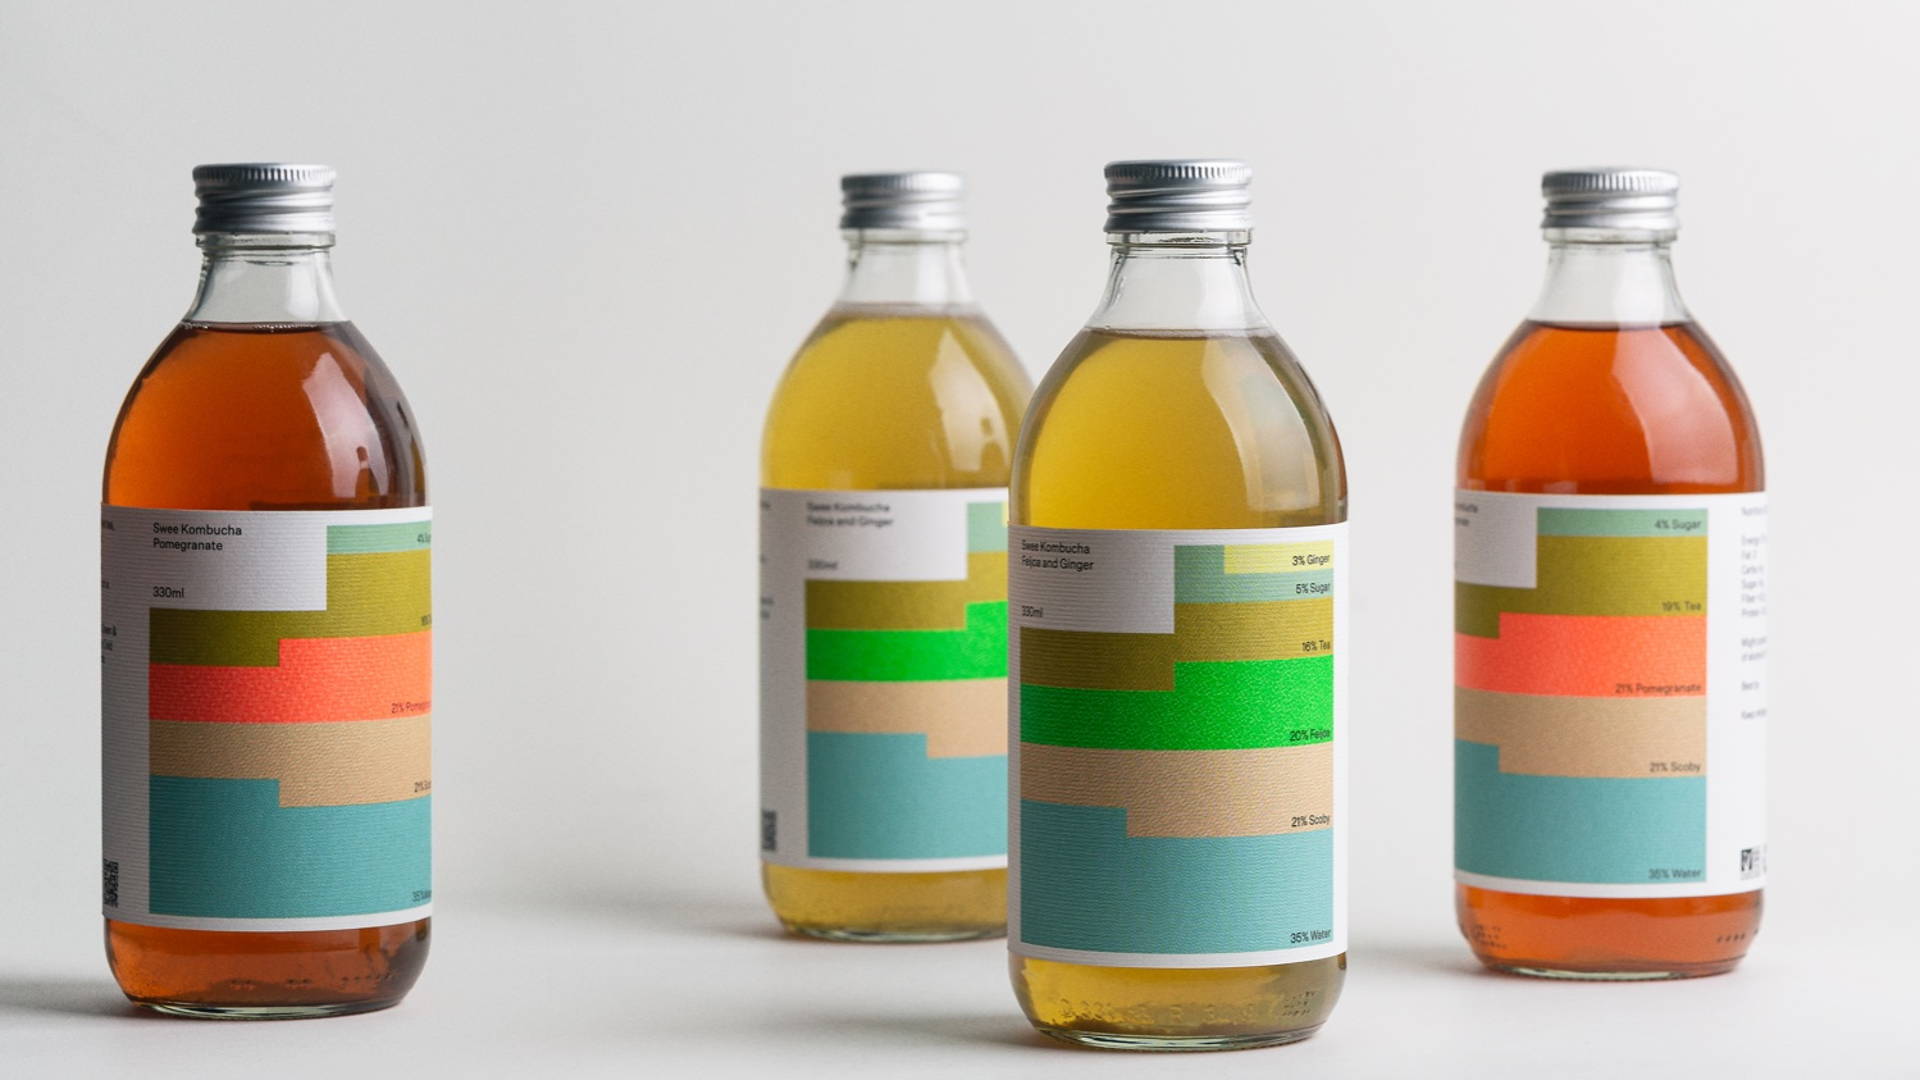 Featured image for Swee Kombucha Implements A Modular Infographics System Through The Packaging